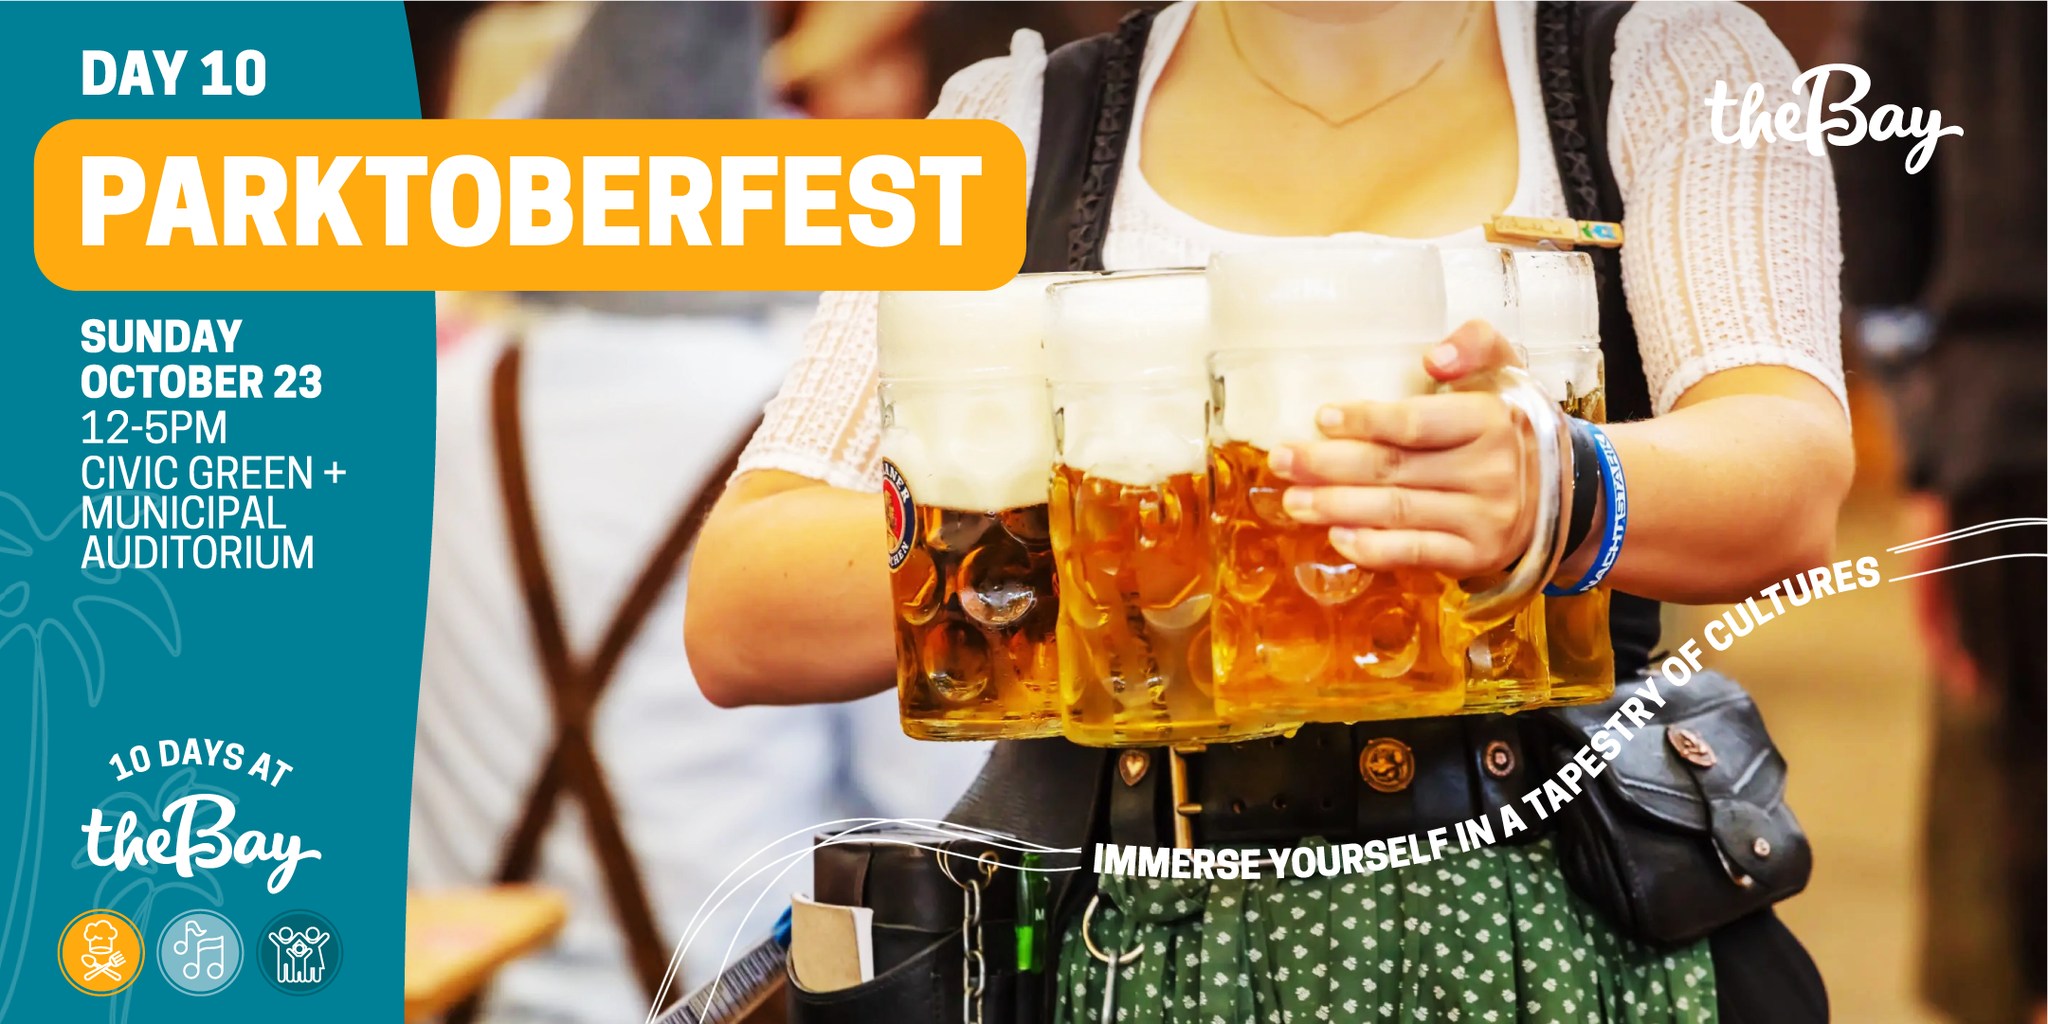 Parktoberfest | 10 Days at The Bay Grand Opening
Mon Oct 24, 12:00 PM - Thu Nov 24, 5:00 PM
in 4 days